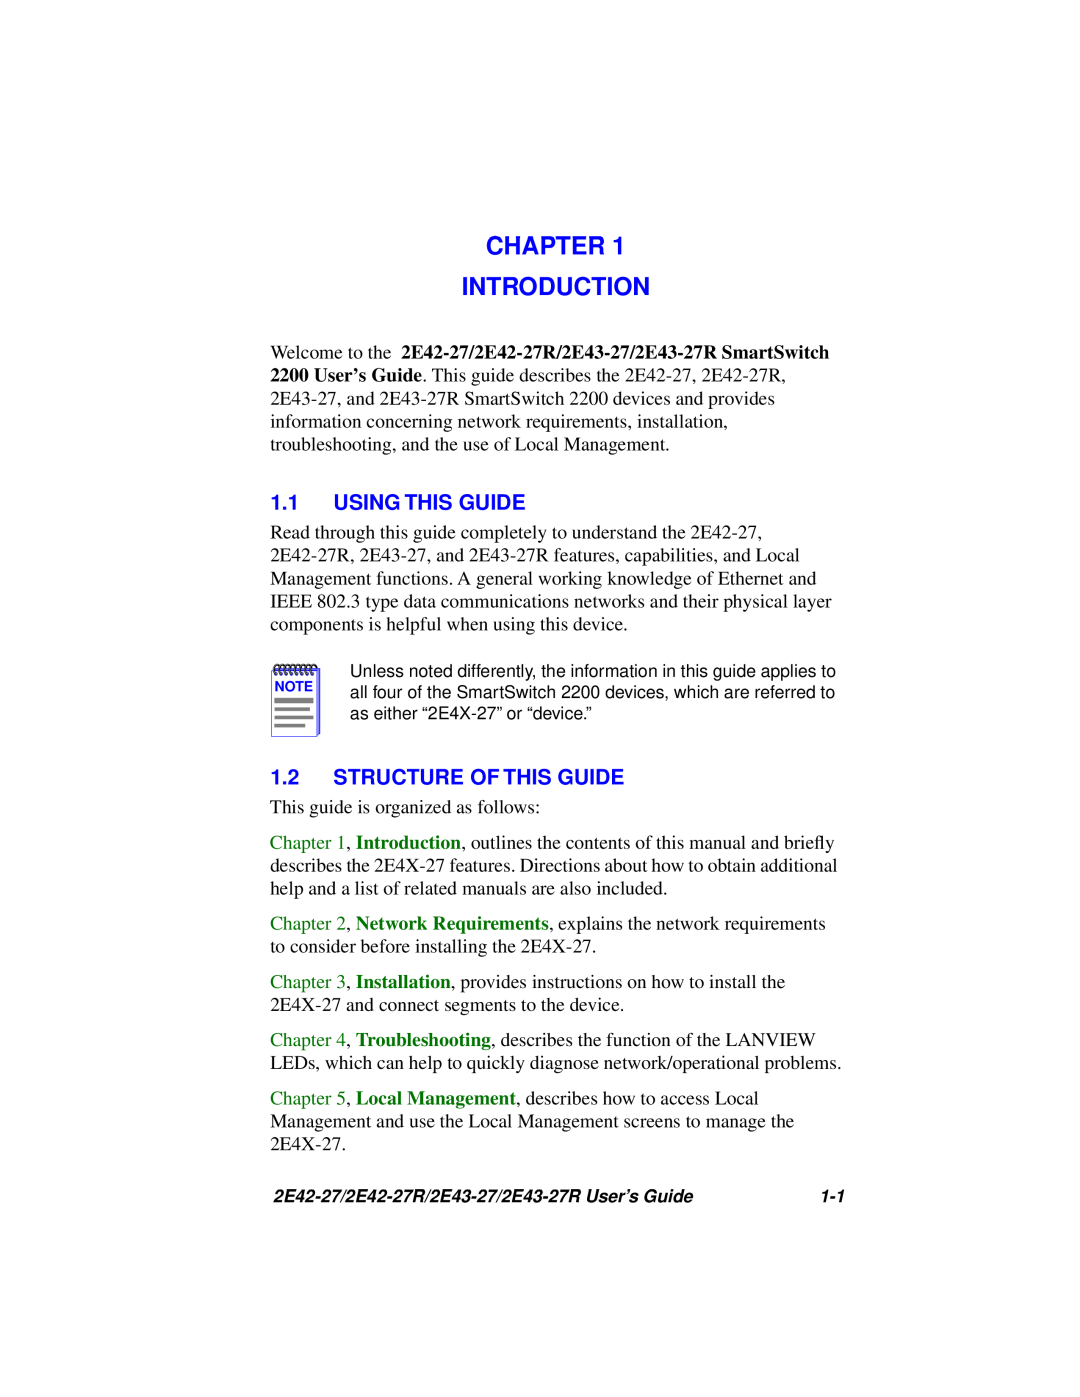 Cabletron Systems 2E43-27R, 2E42-27R manual Chapter Introduction, Using This Guide, Structure Of This Guide 